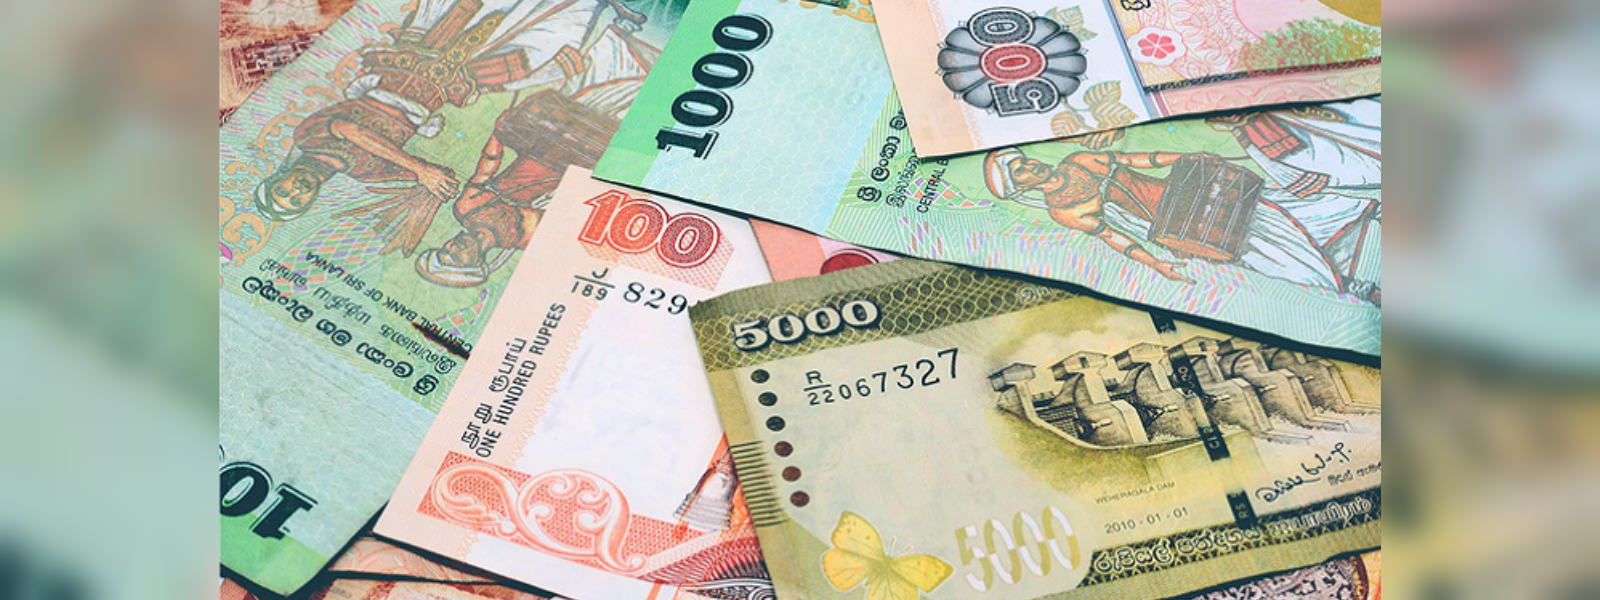 Four arrested for counterfeit currency